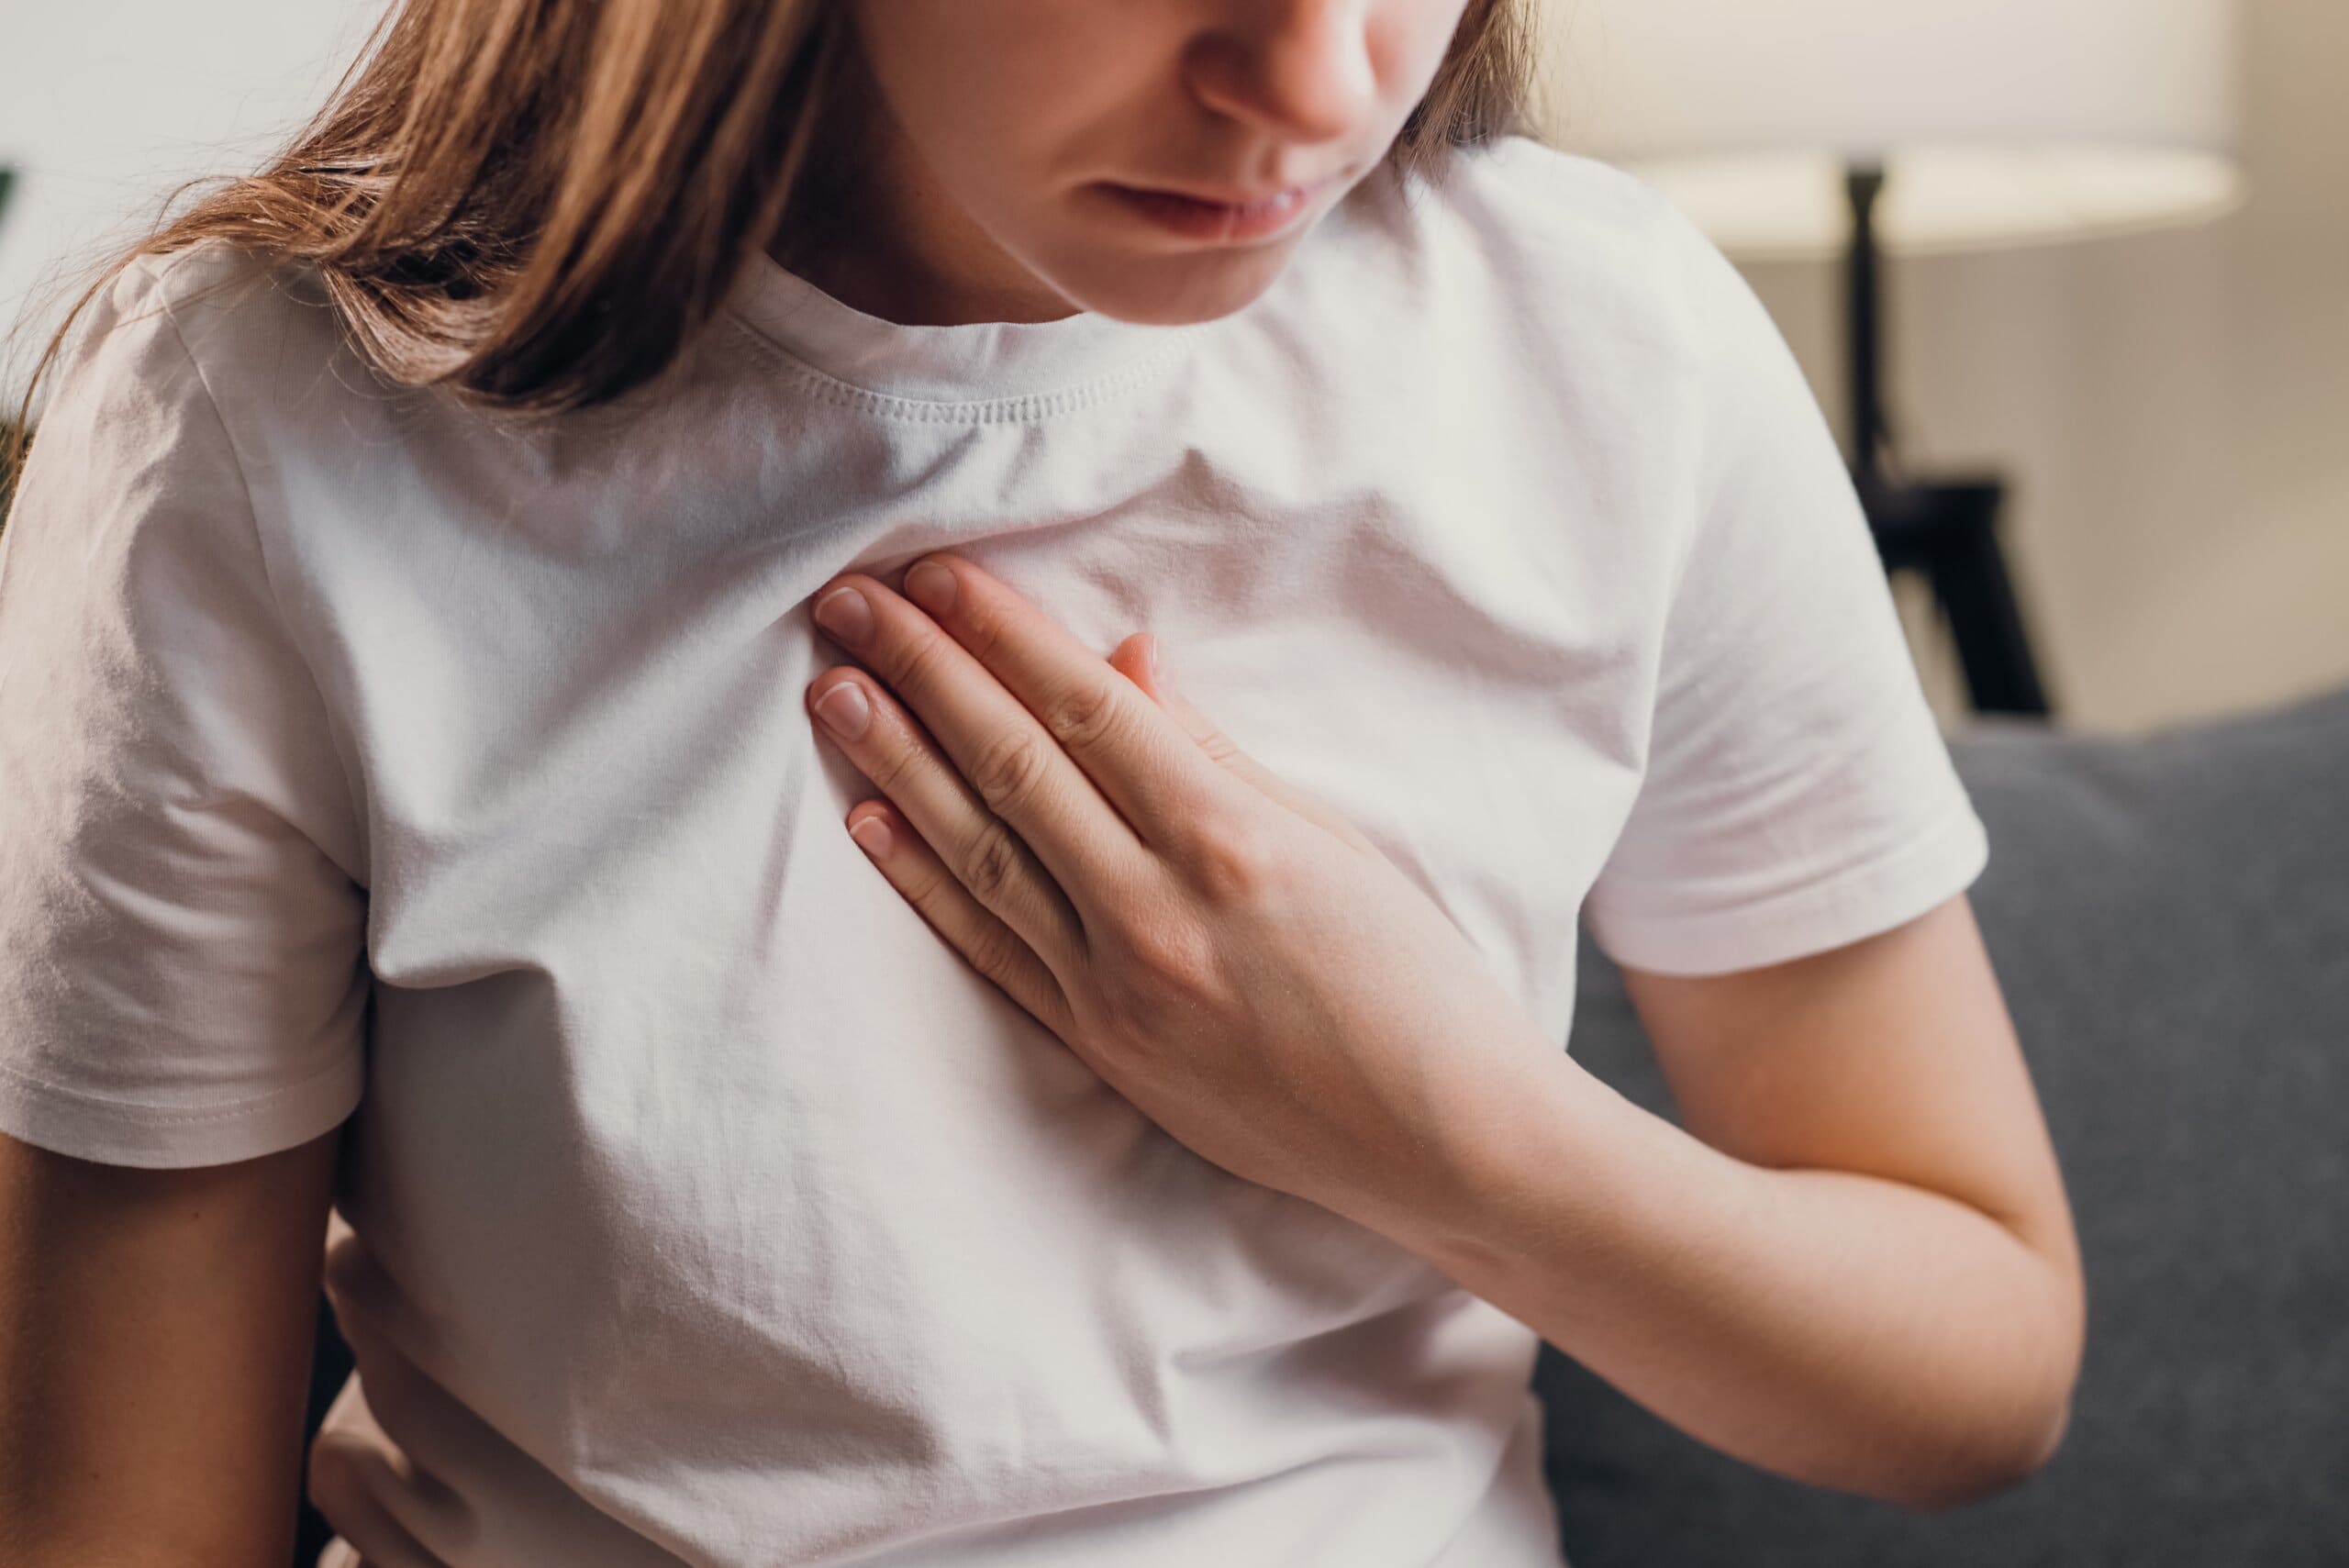 Young woman clutching her chest in pain.